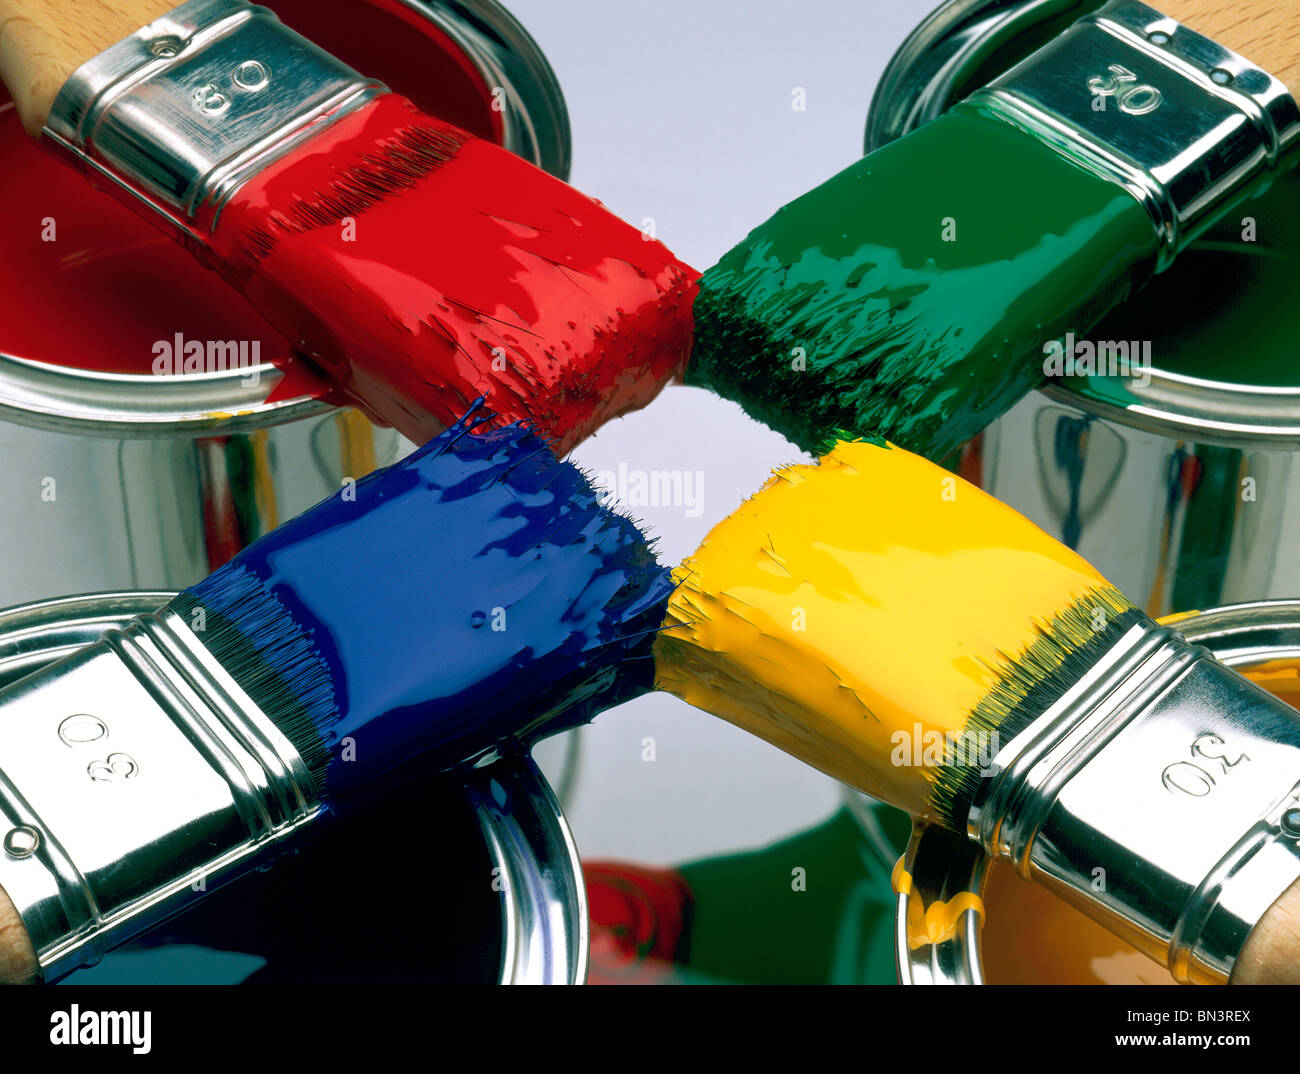 Close-up of four paintbrushes on paint cans Stock Photo